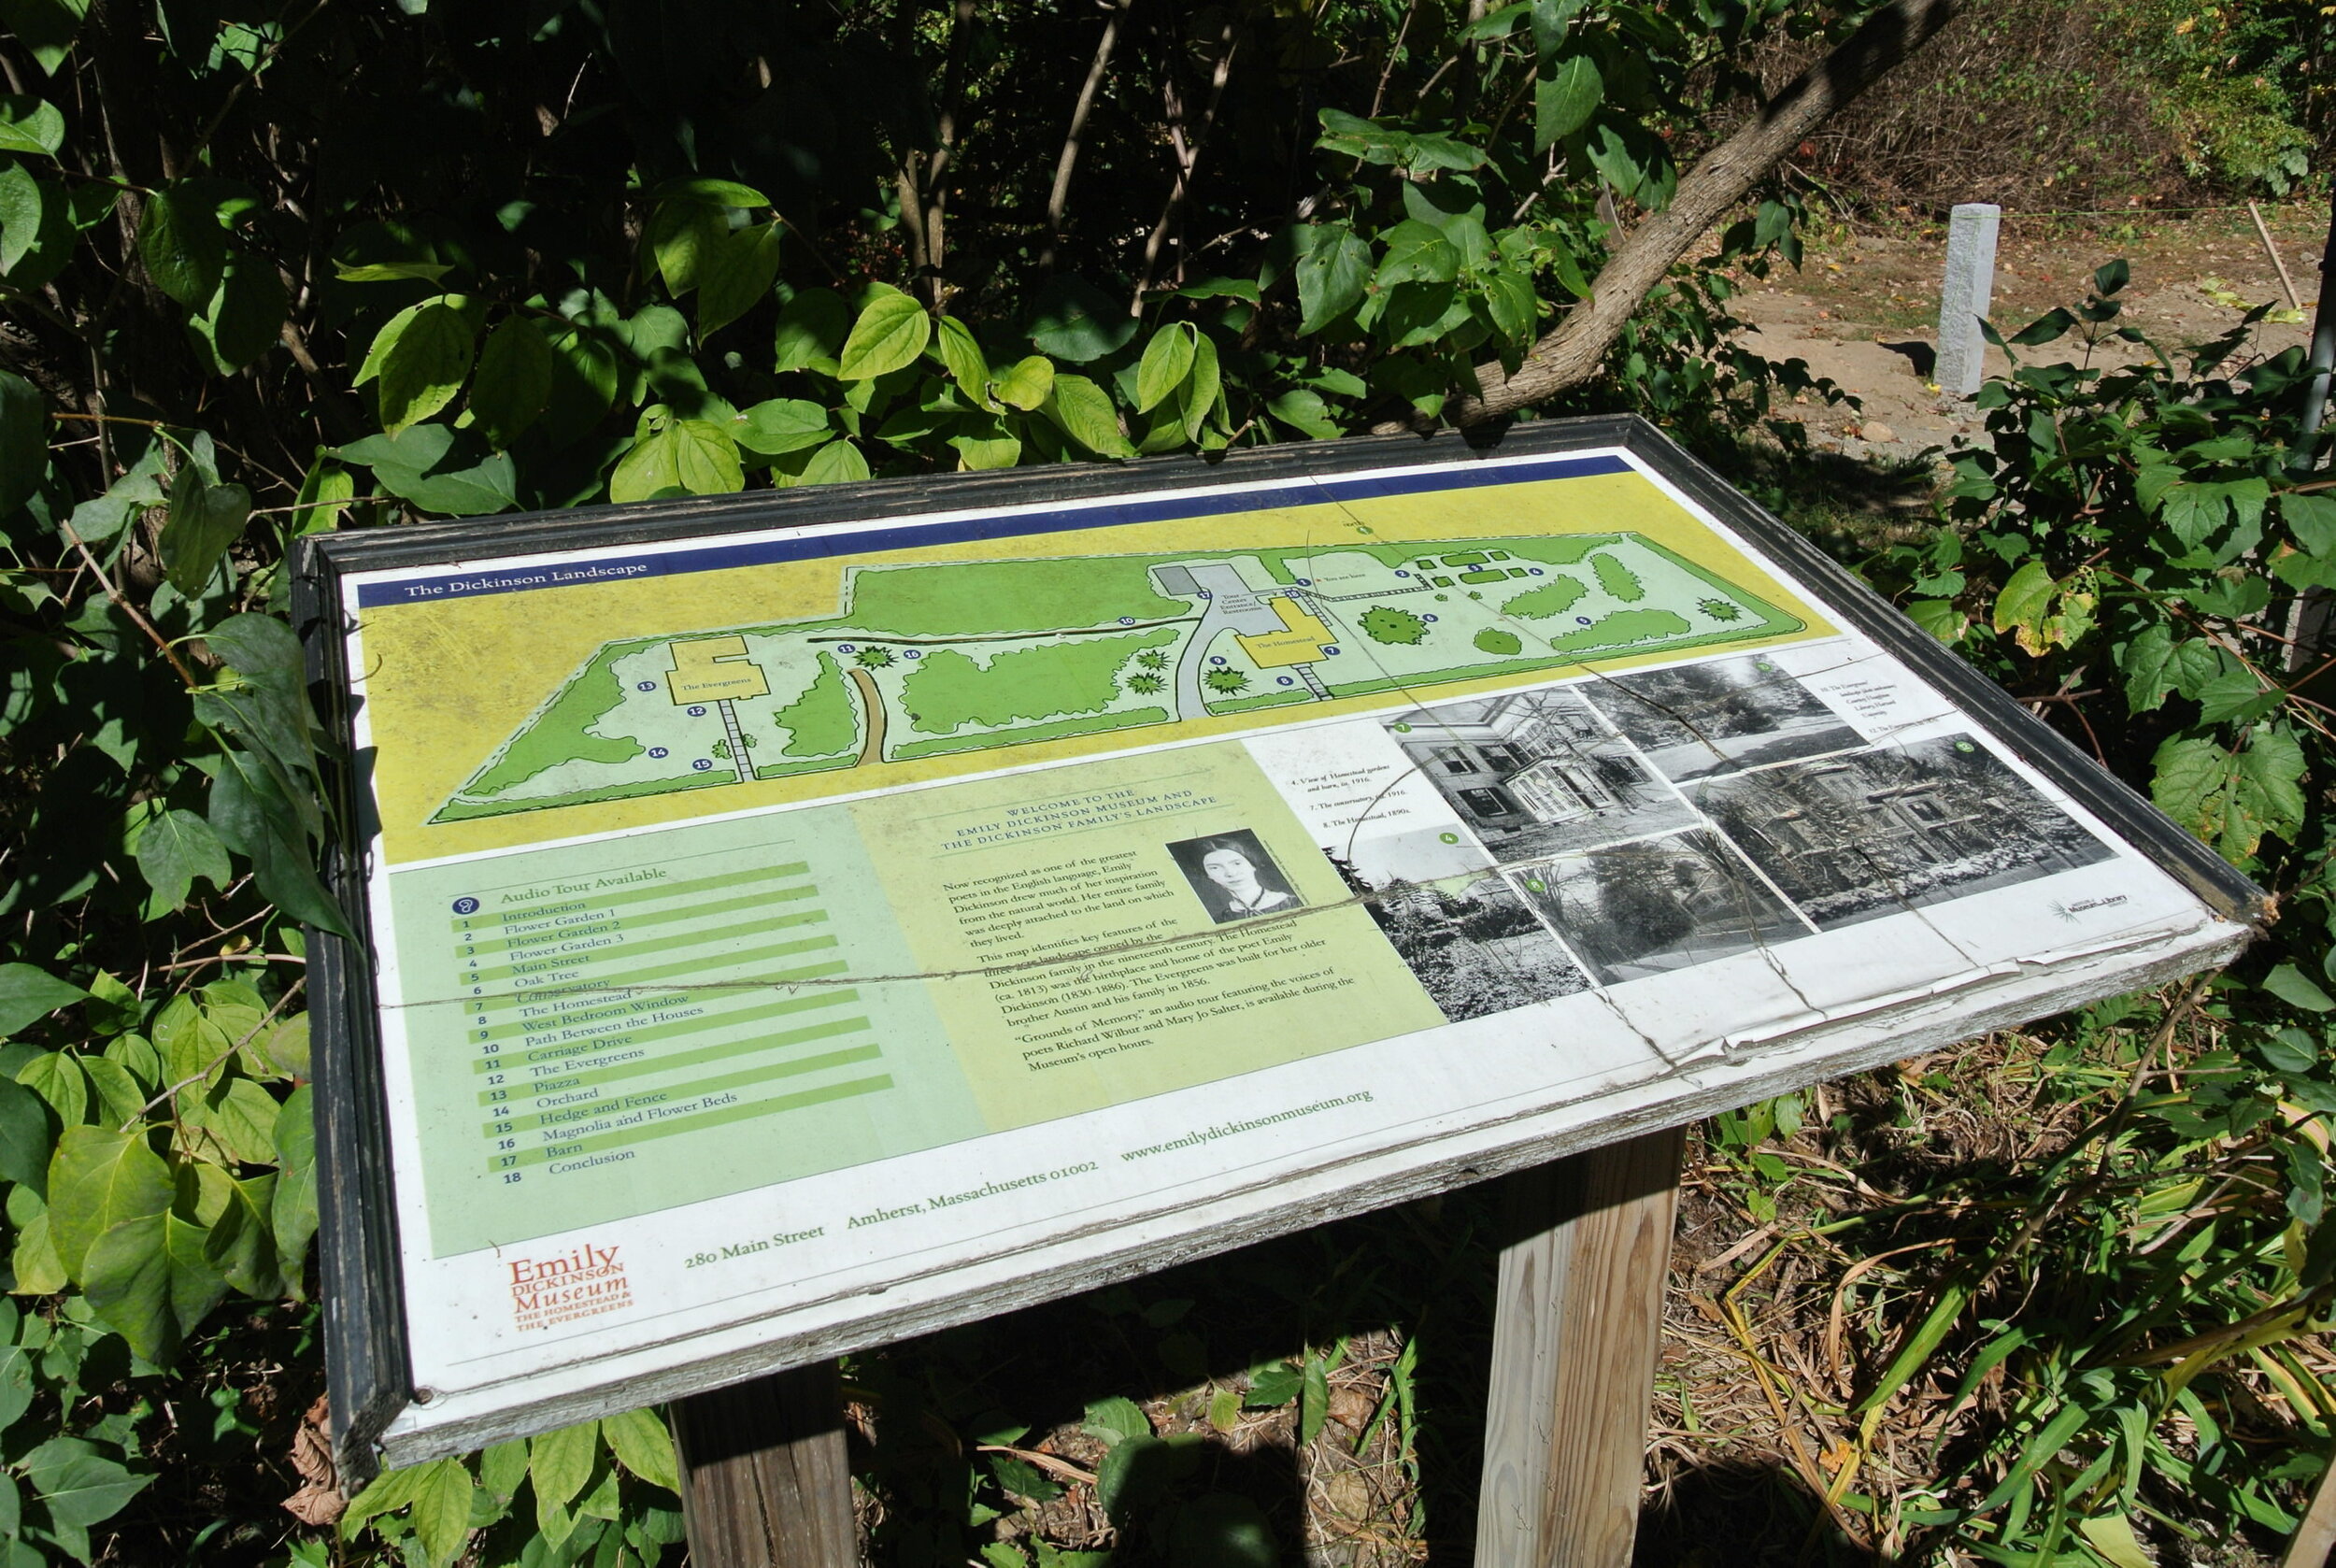 The on-site garden tour map